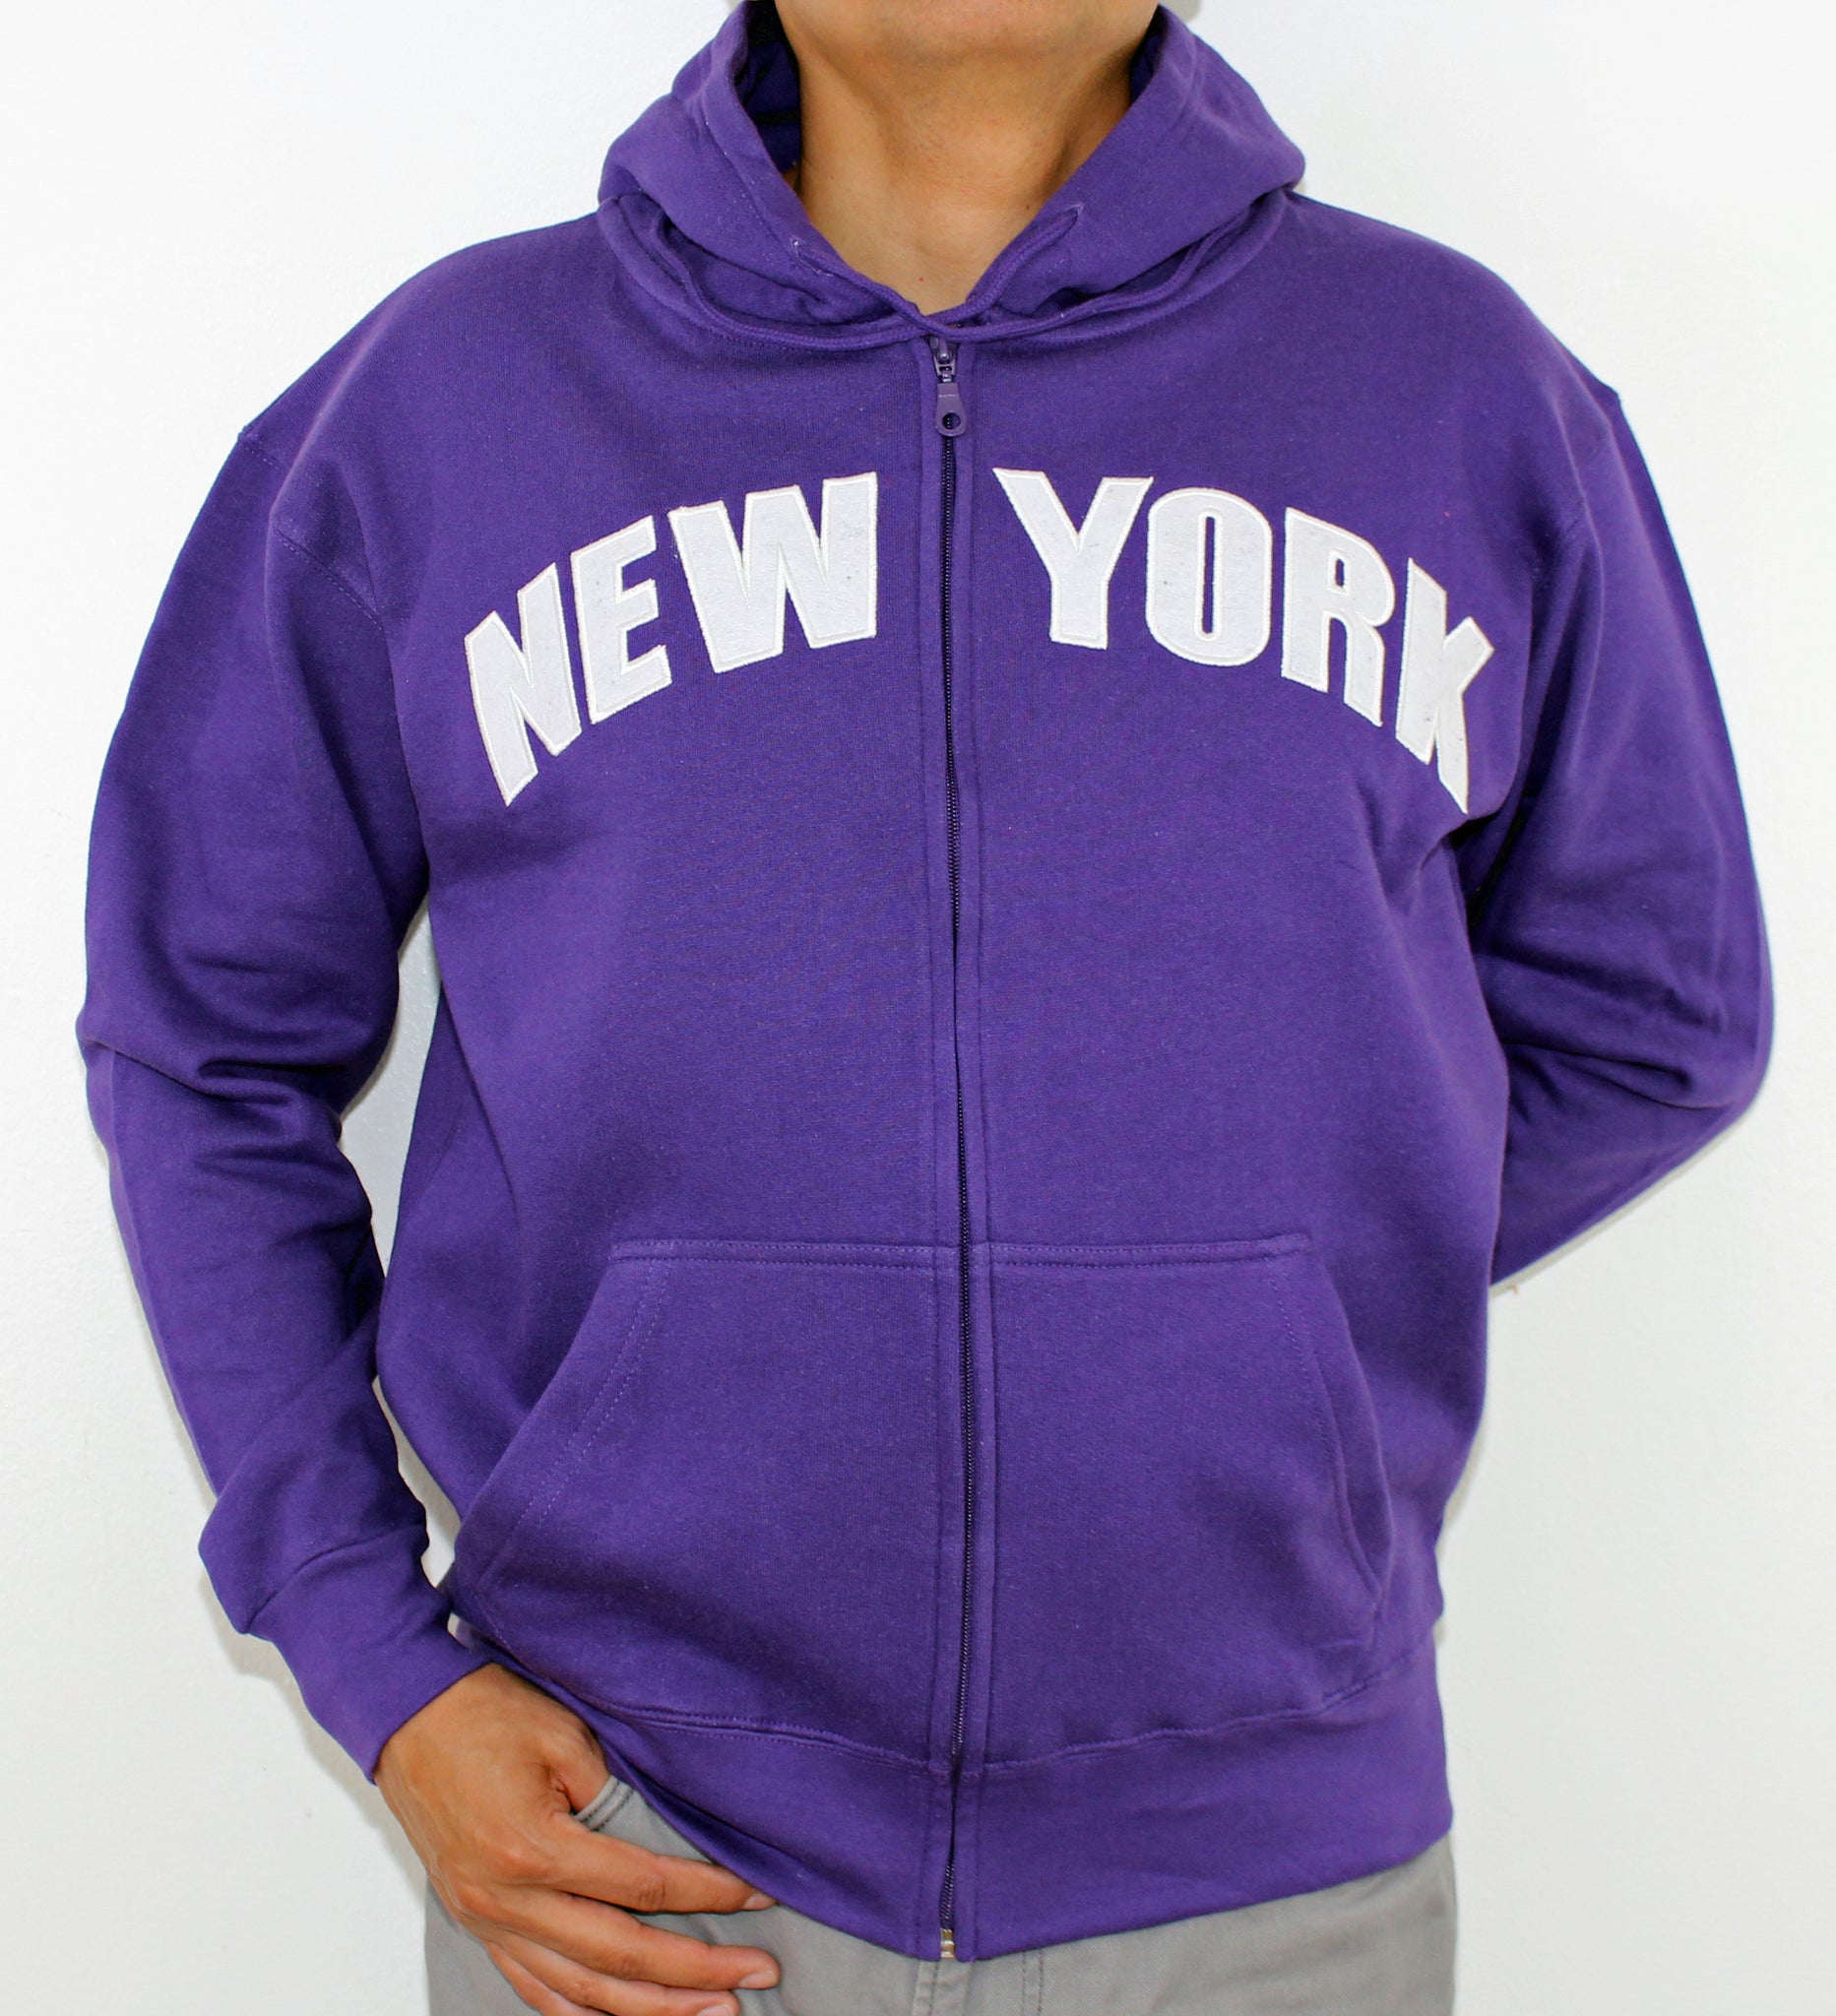 Adult Zipper Hoodies Embroidered with NEW YORK – WALI USA INC